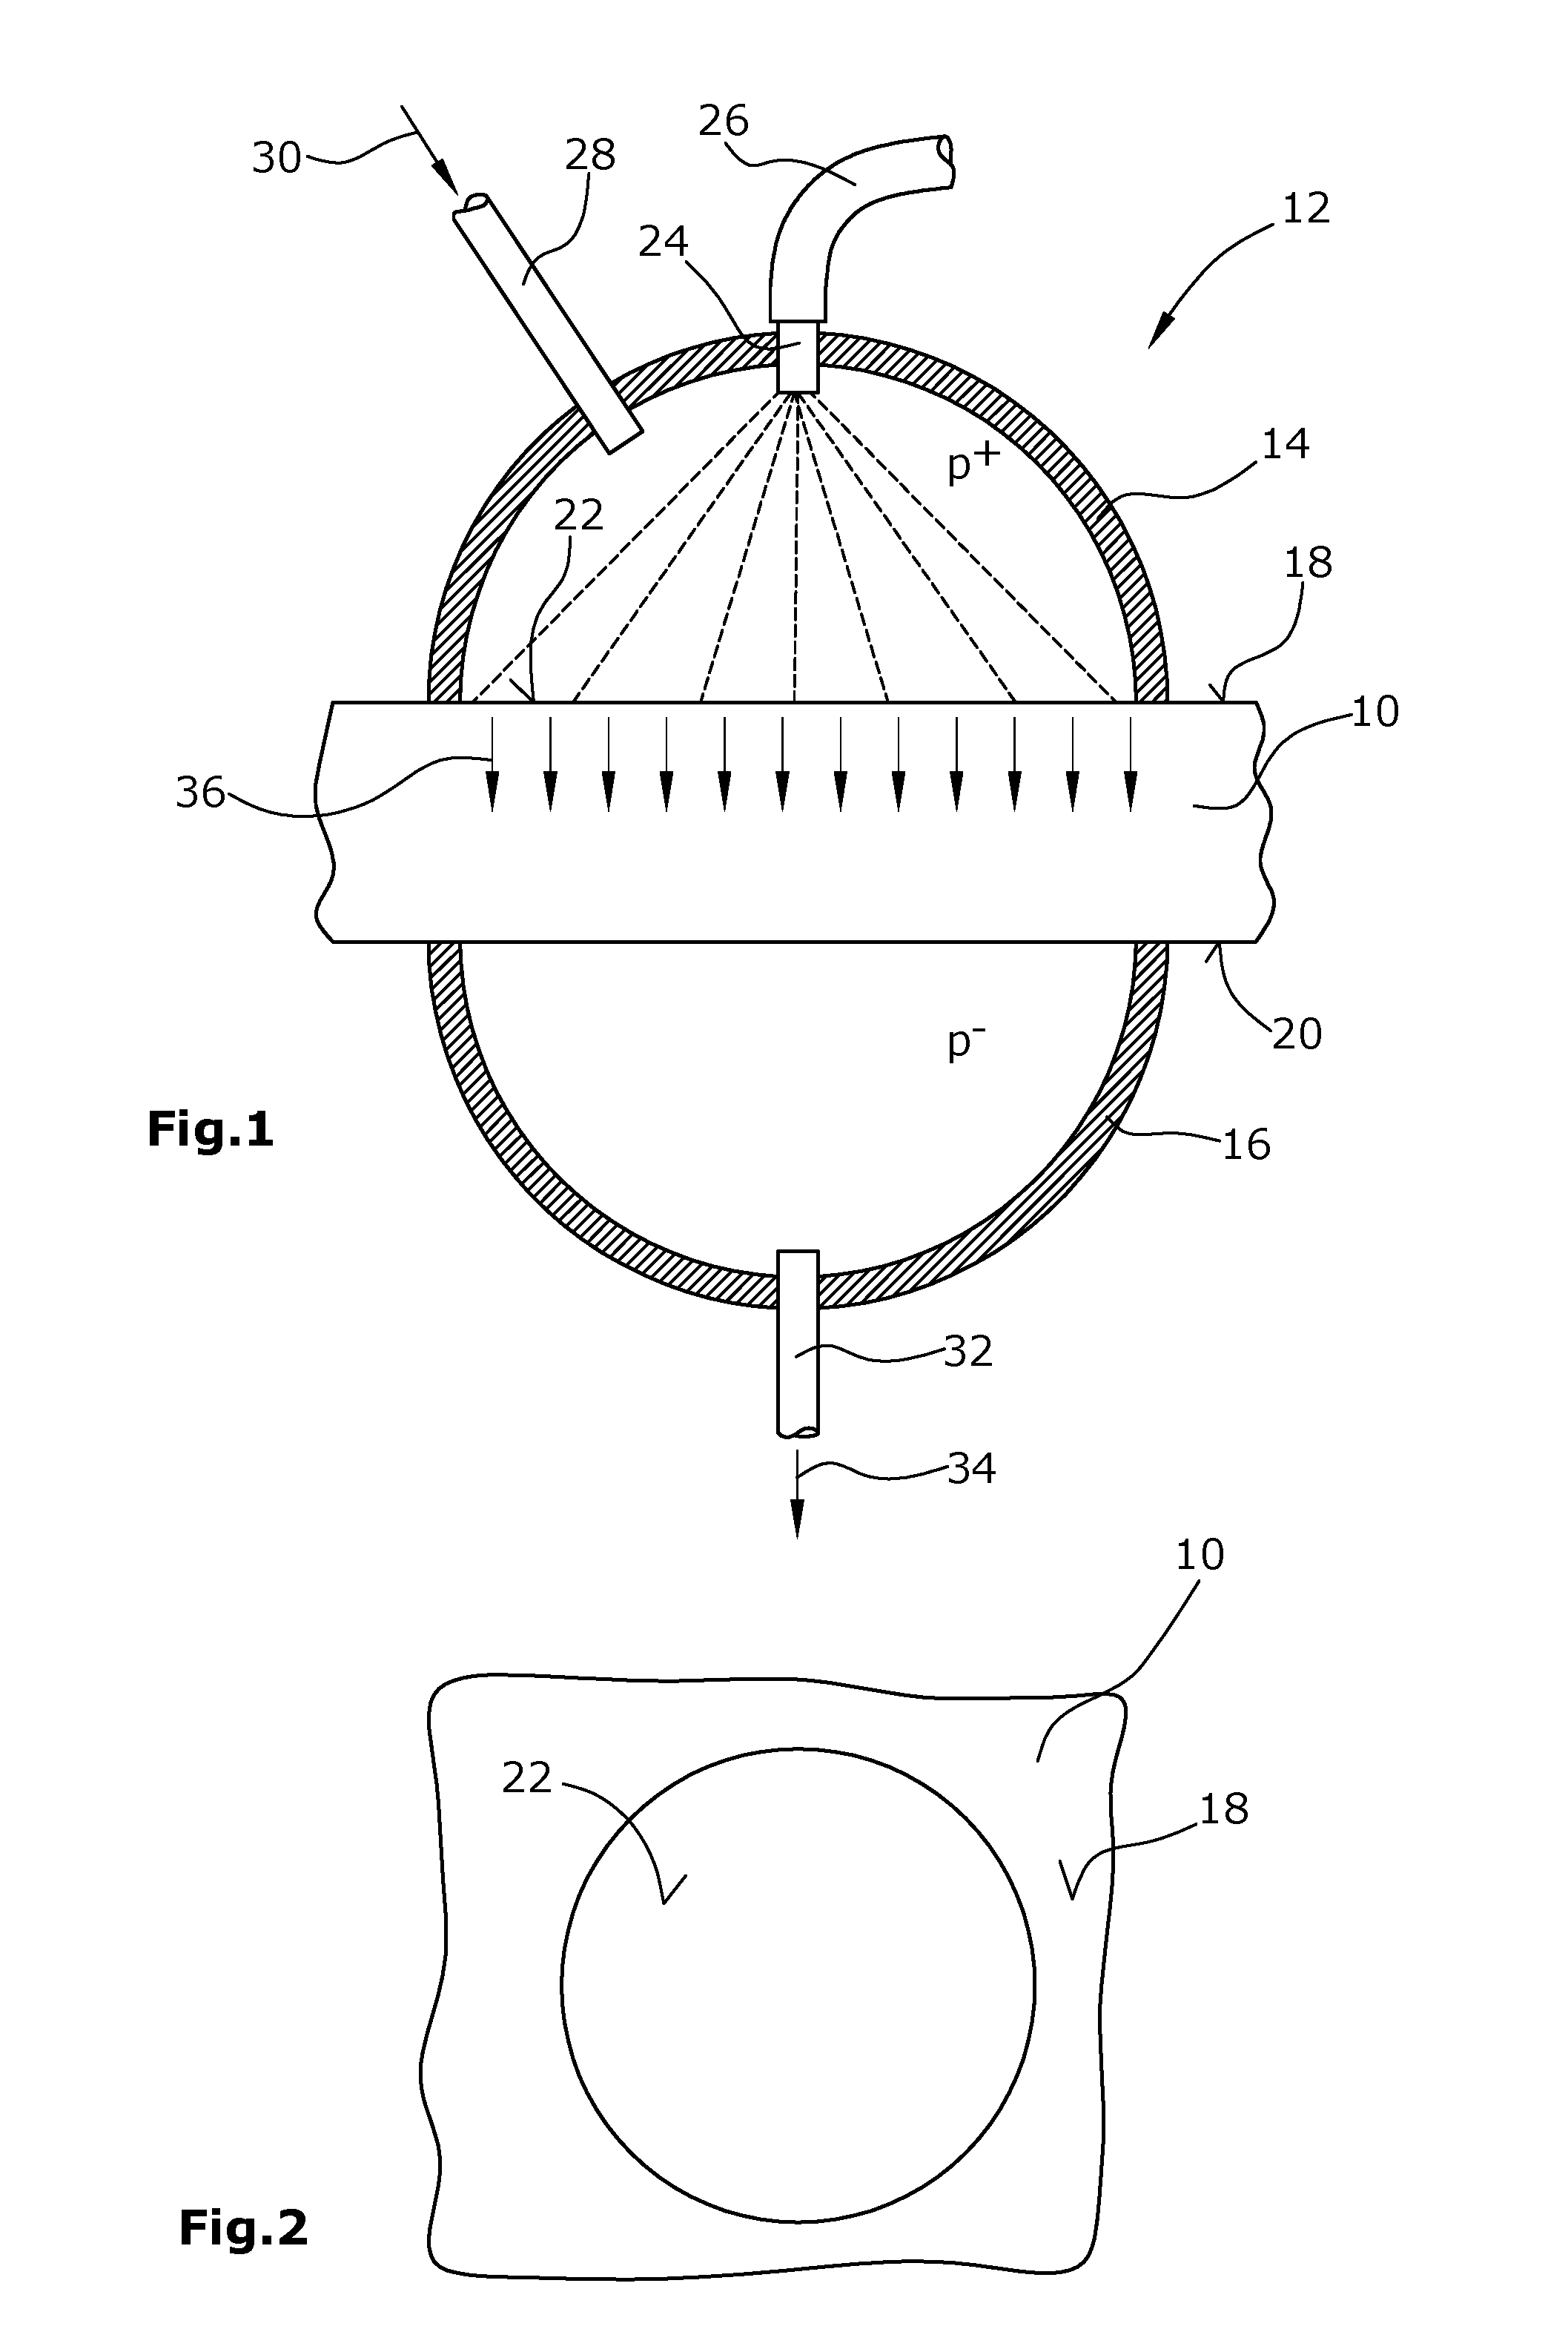 Method for Producing a Partially Solidified Wood Fiber Board, Partially Solidified Wood Fiber Board, and Device for Producing Same